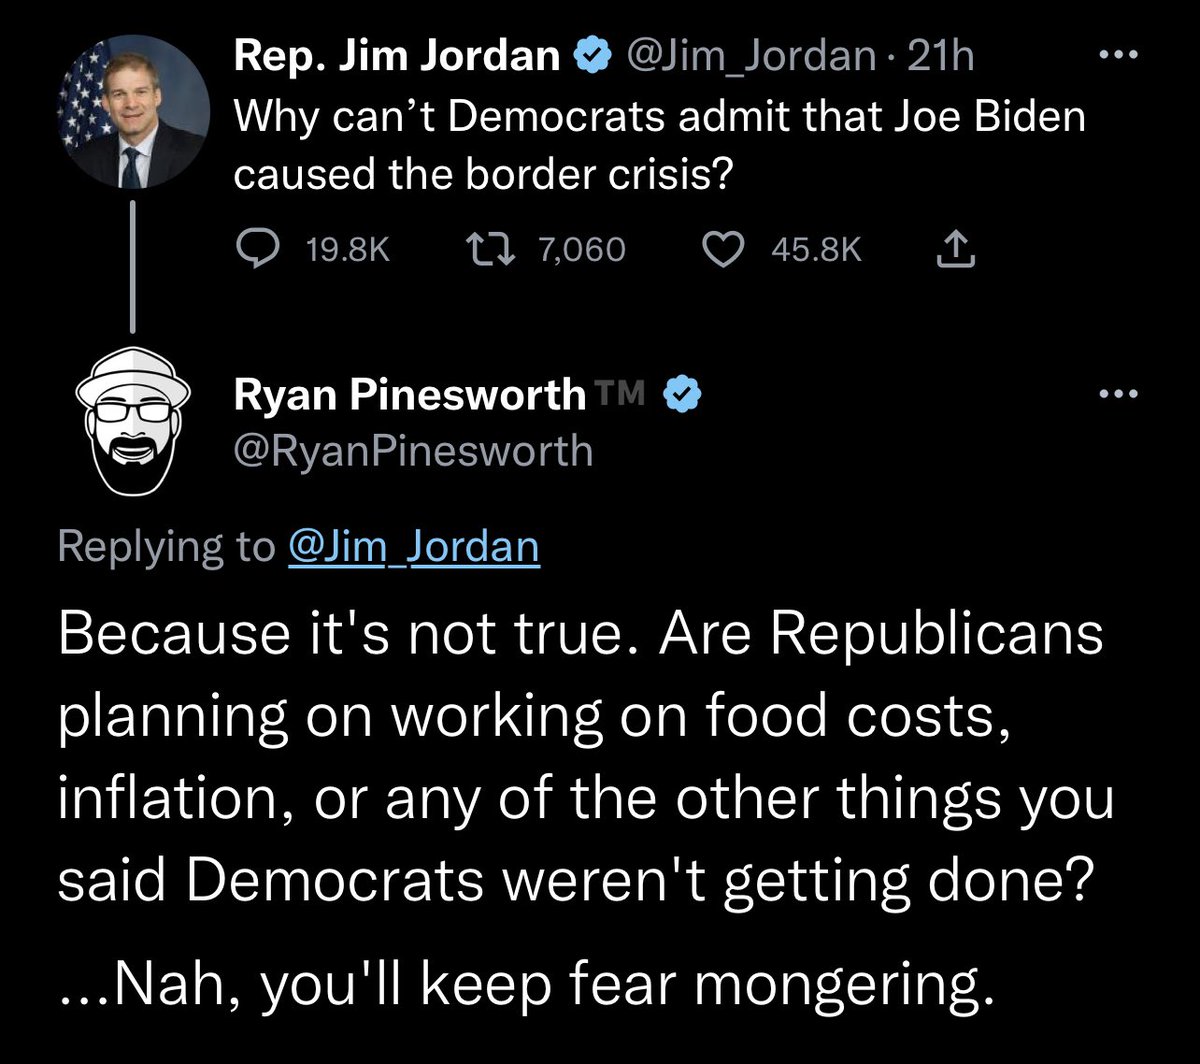 Jim Jordan and the Republican Party do not have a plan to help Americans in these difficult times.